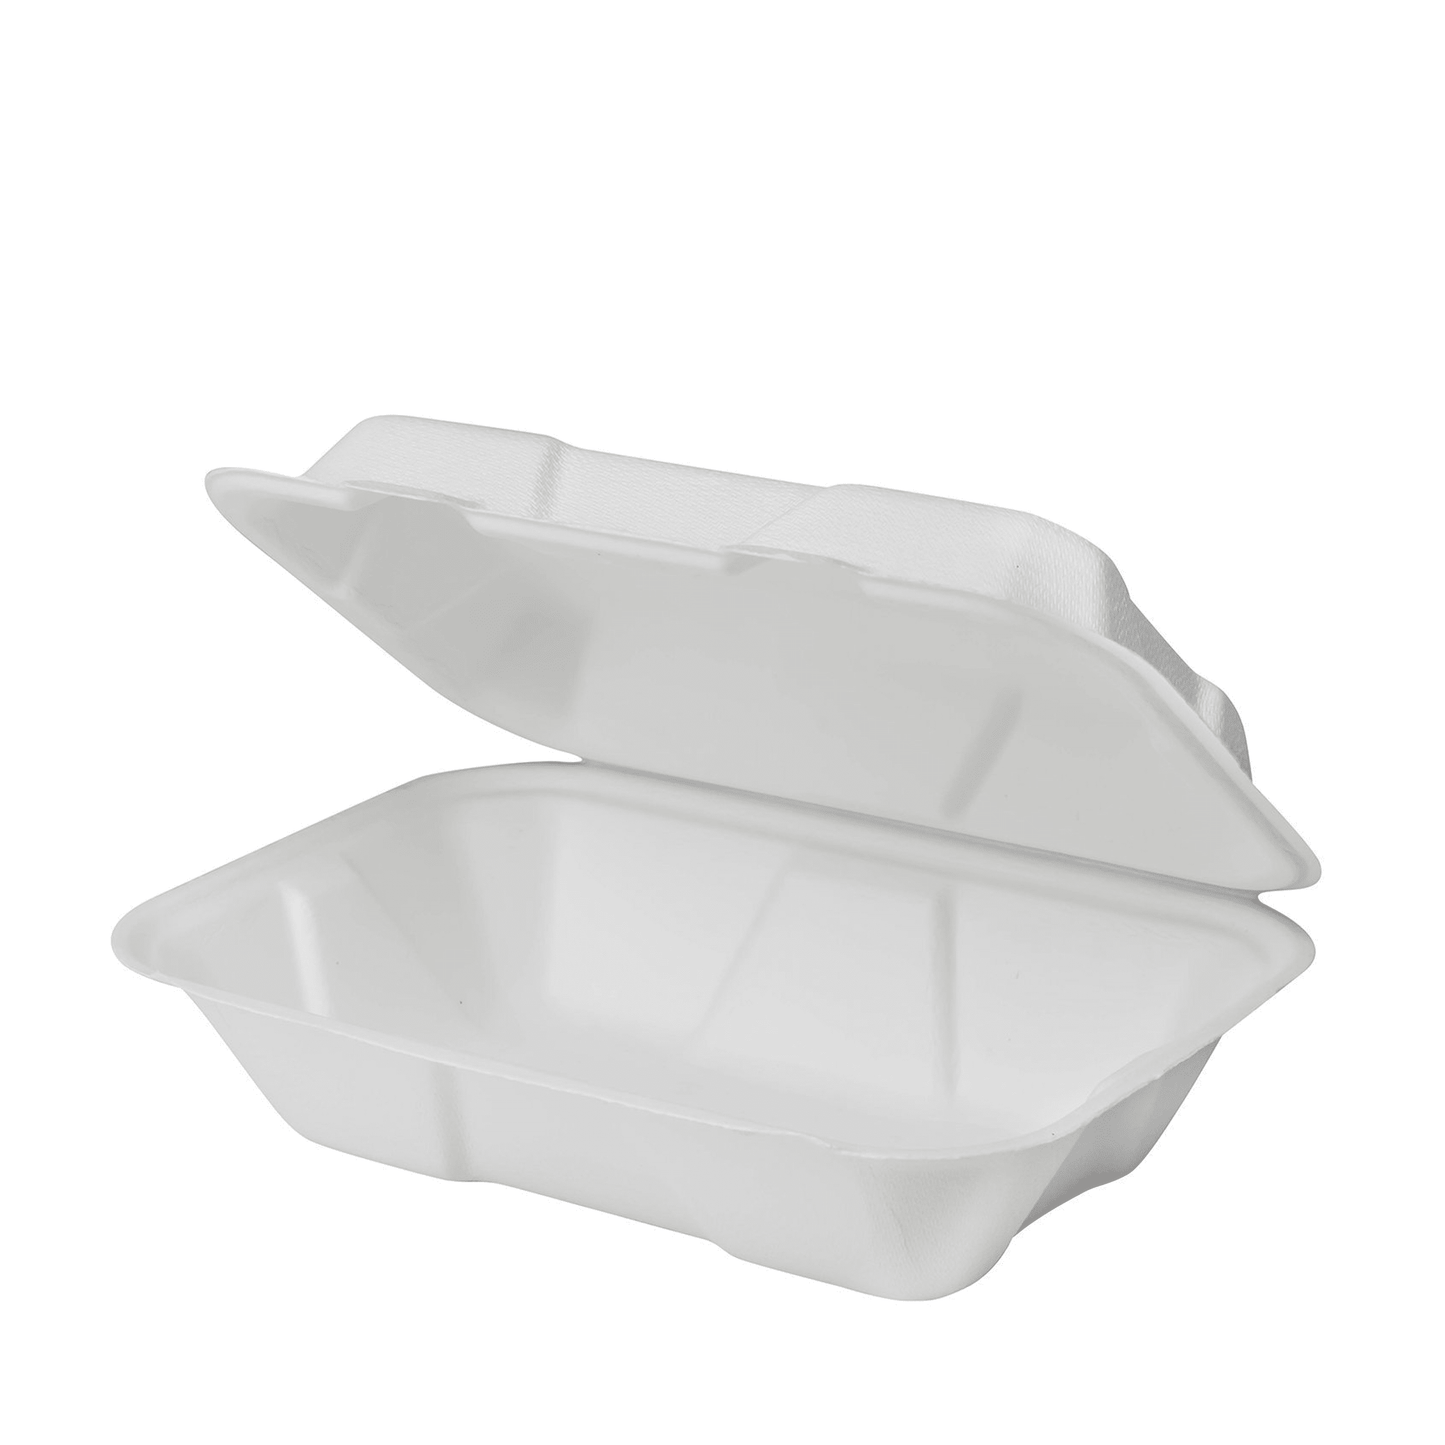 Karat Compostable Bagasse Hinged Container, 9" x 6" 200ct